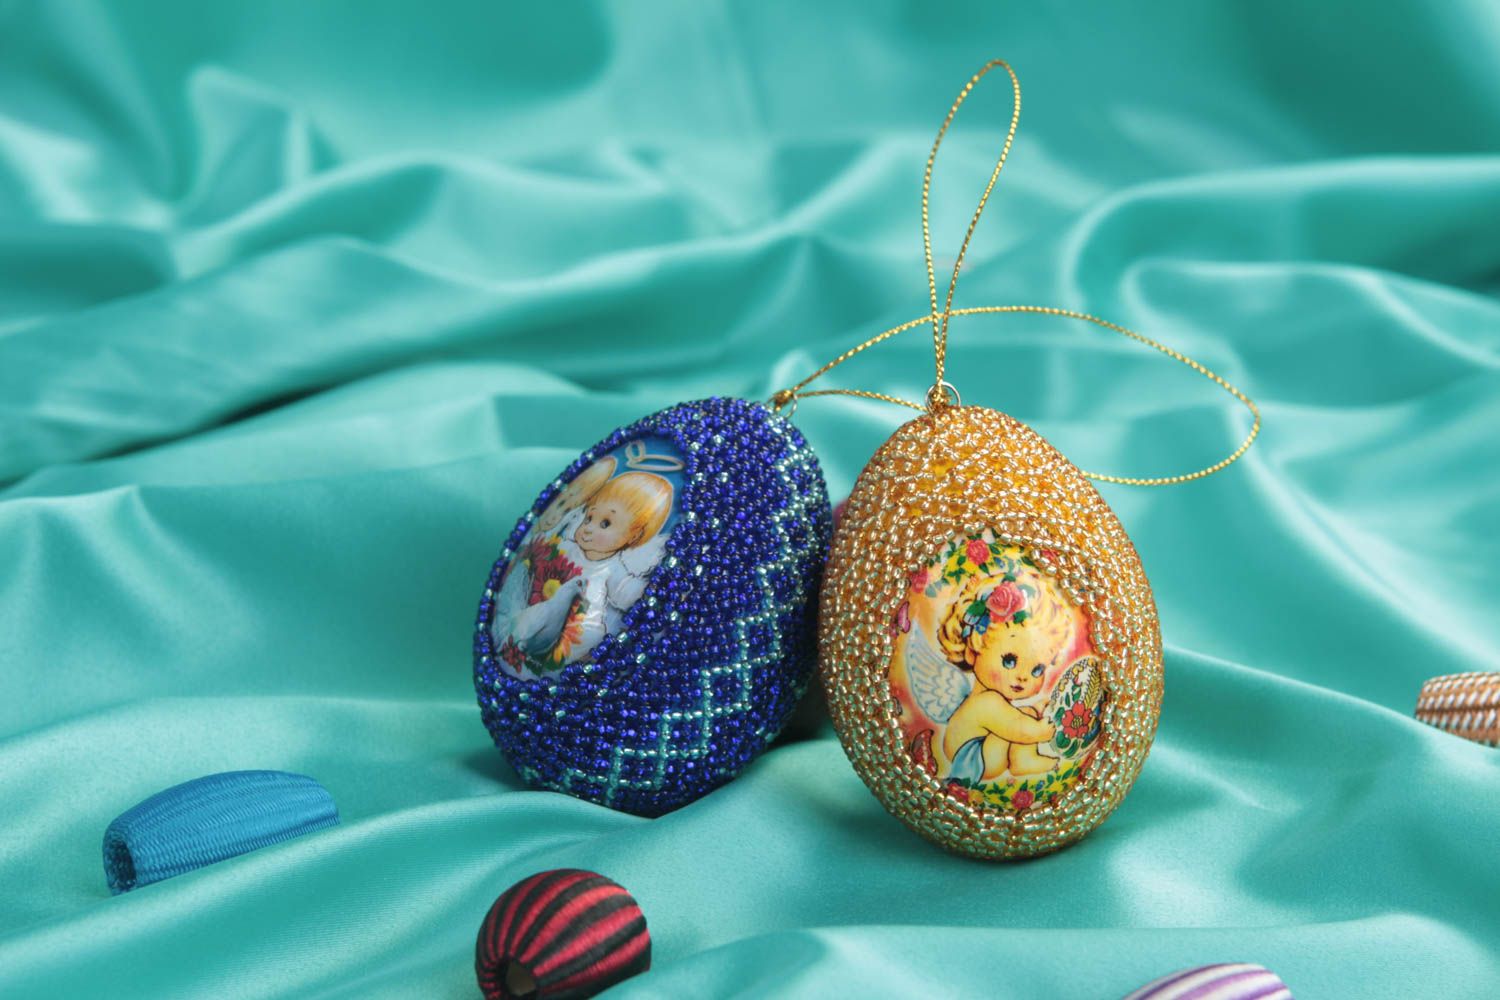 Set of 2 Easter eggs decorative eggs Easter decor wall hangings handmade gifts photo 1